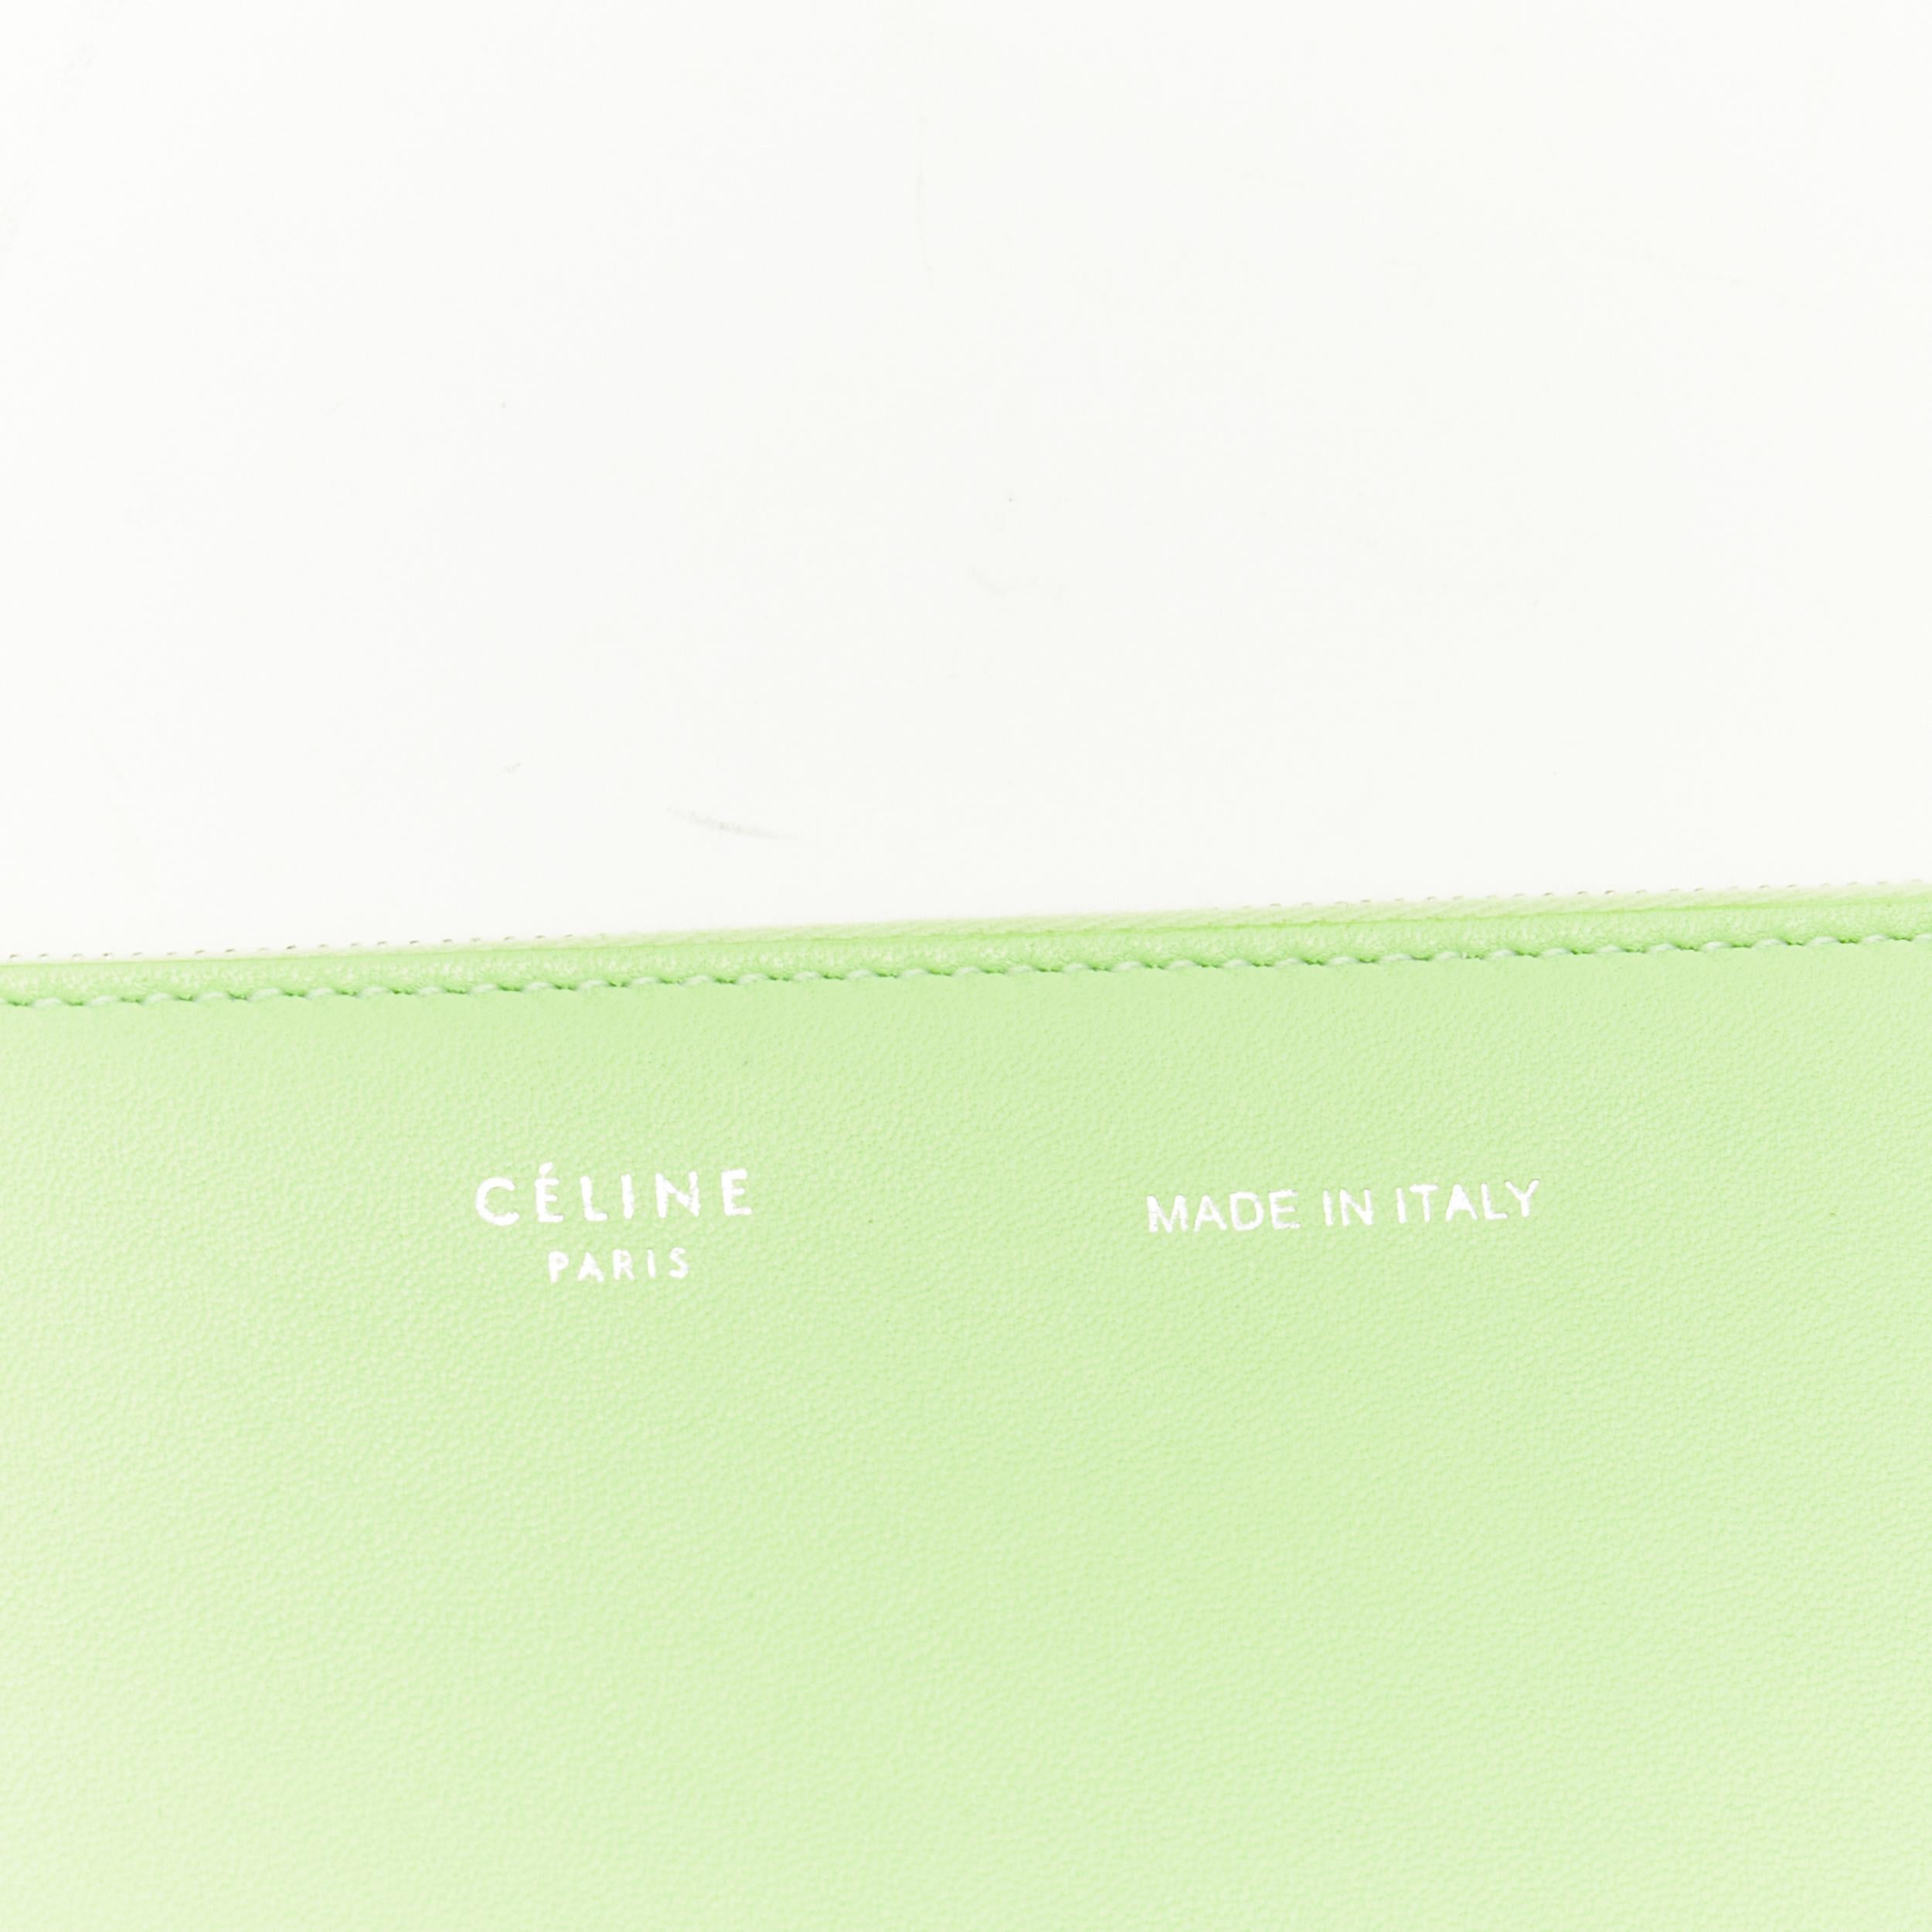 OLD CELINE Phoebe Philo 2018 Lime green zip pouch clear PVC shopper tote bag 3